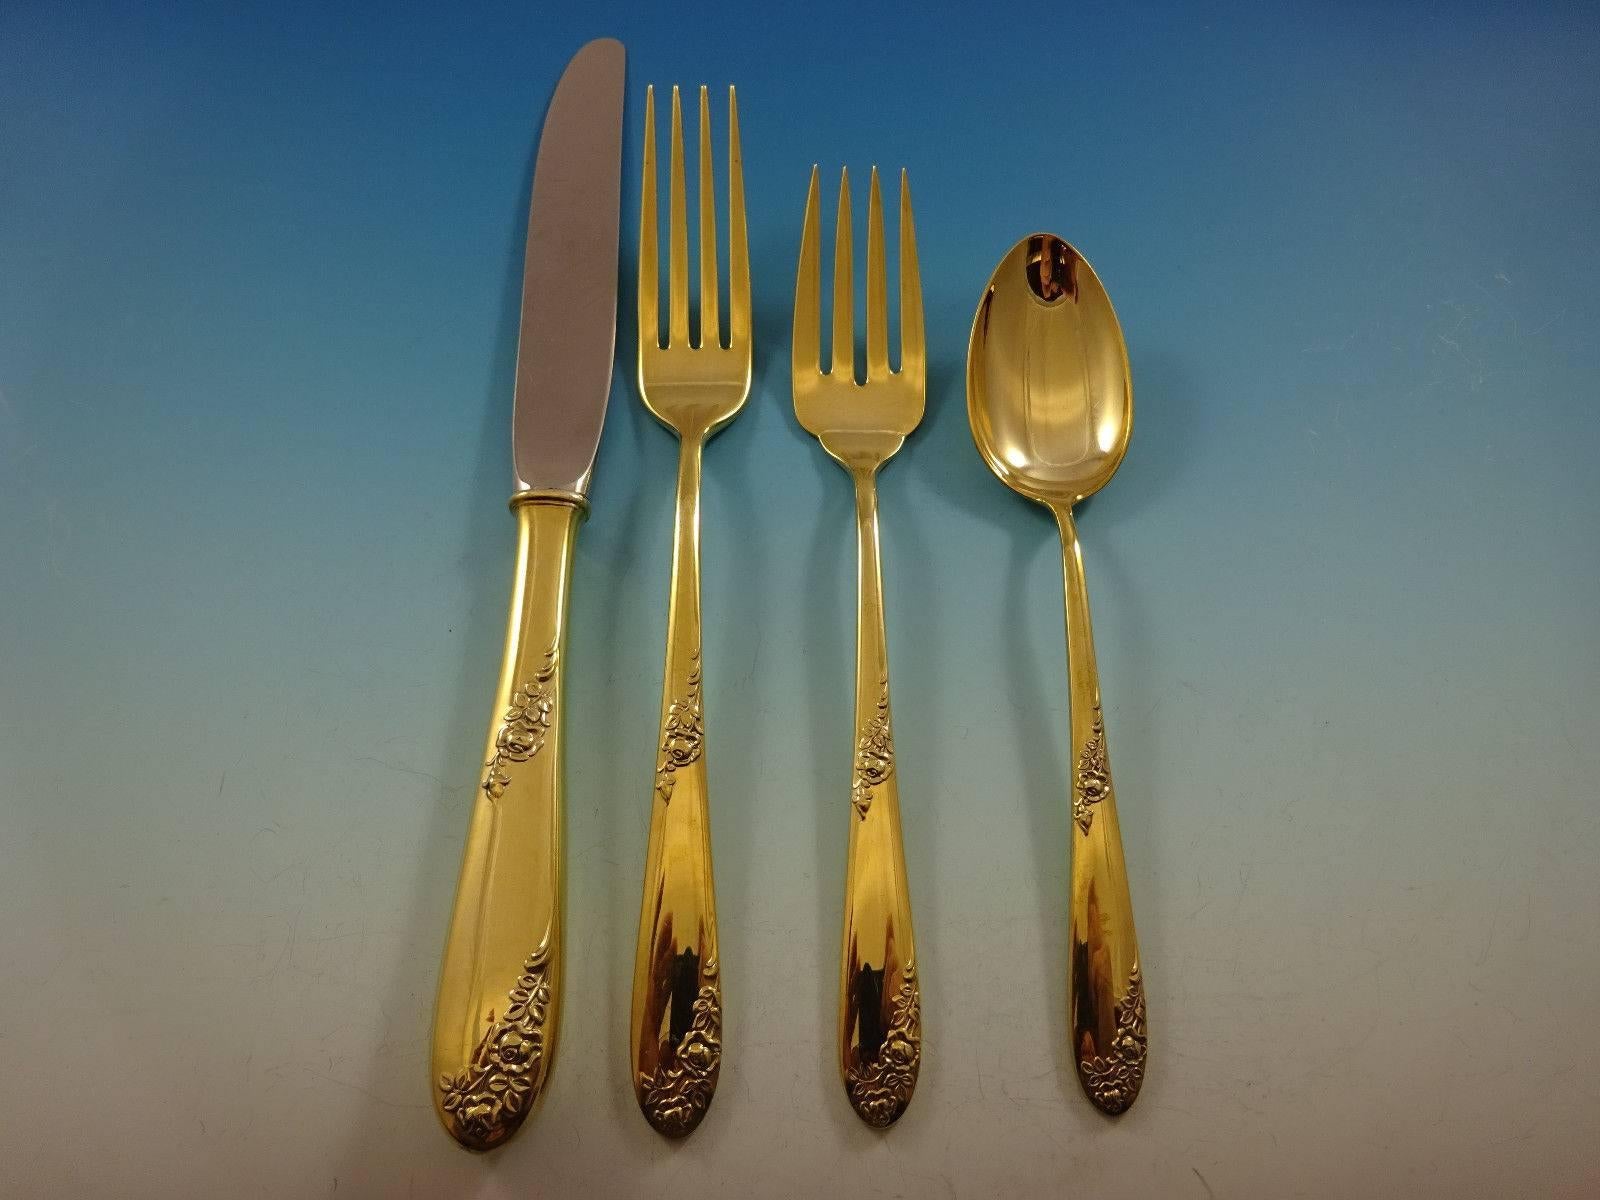 Gorgeous Sweetheart Rose by Lunt sterling silver flatware set - 48 pieces. Gold flatware is on trend and makes a bold statement on your table. 

This set is vermeil (completely gold-washed) and includes:
 
12 Knives, 8 7/8